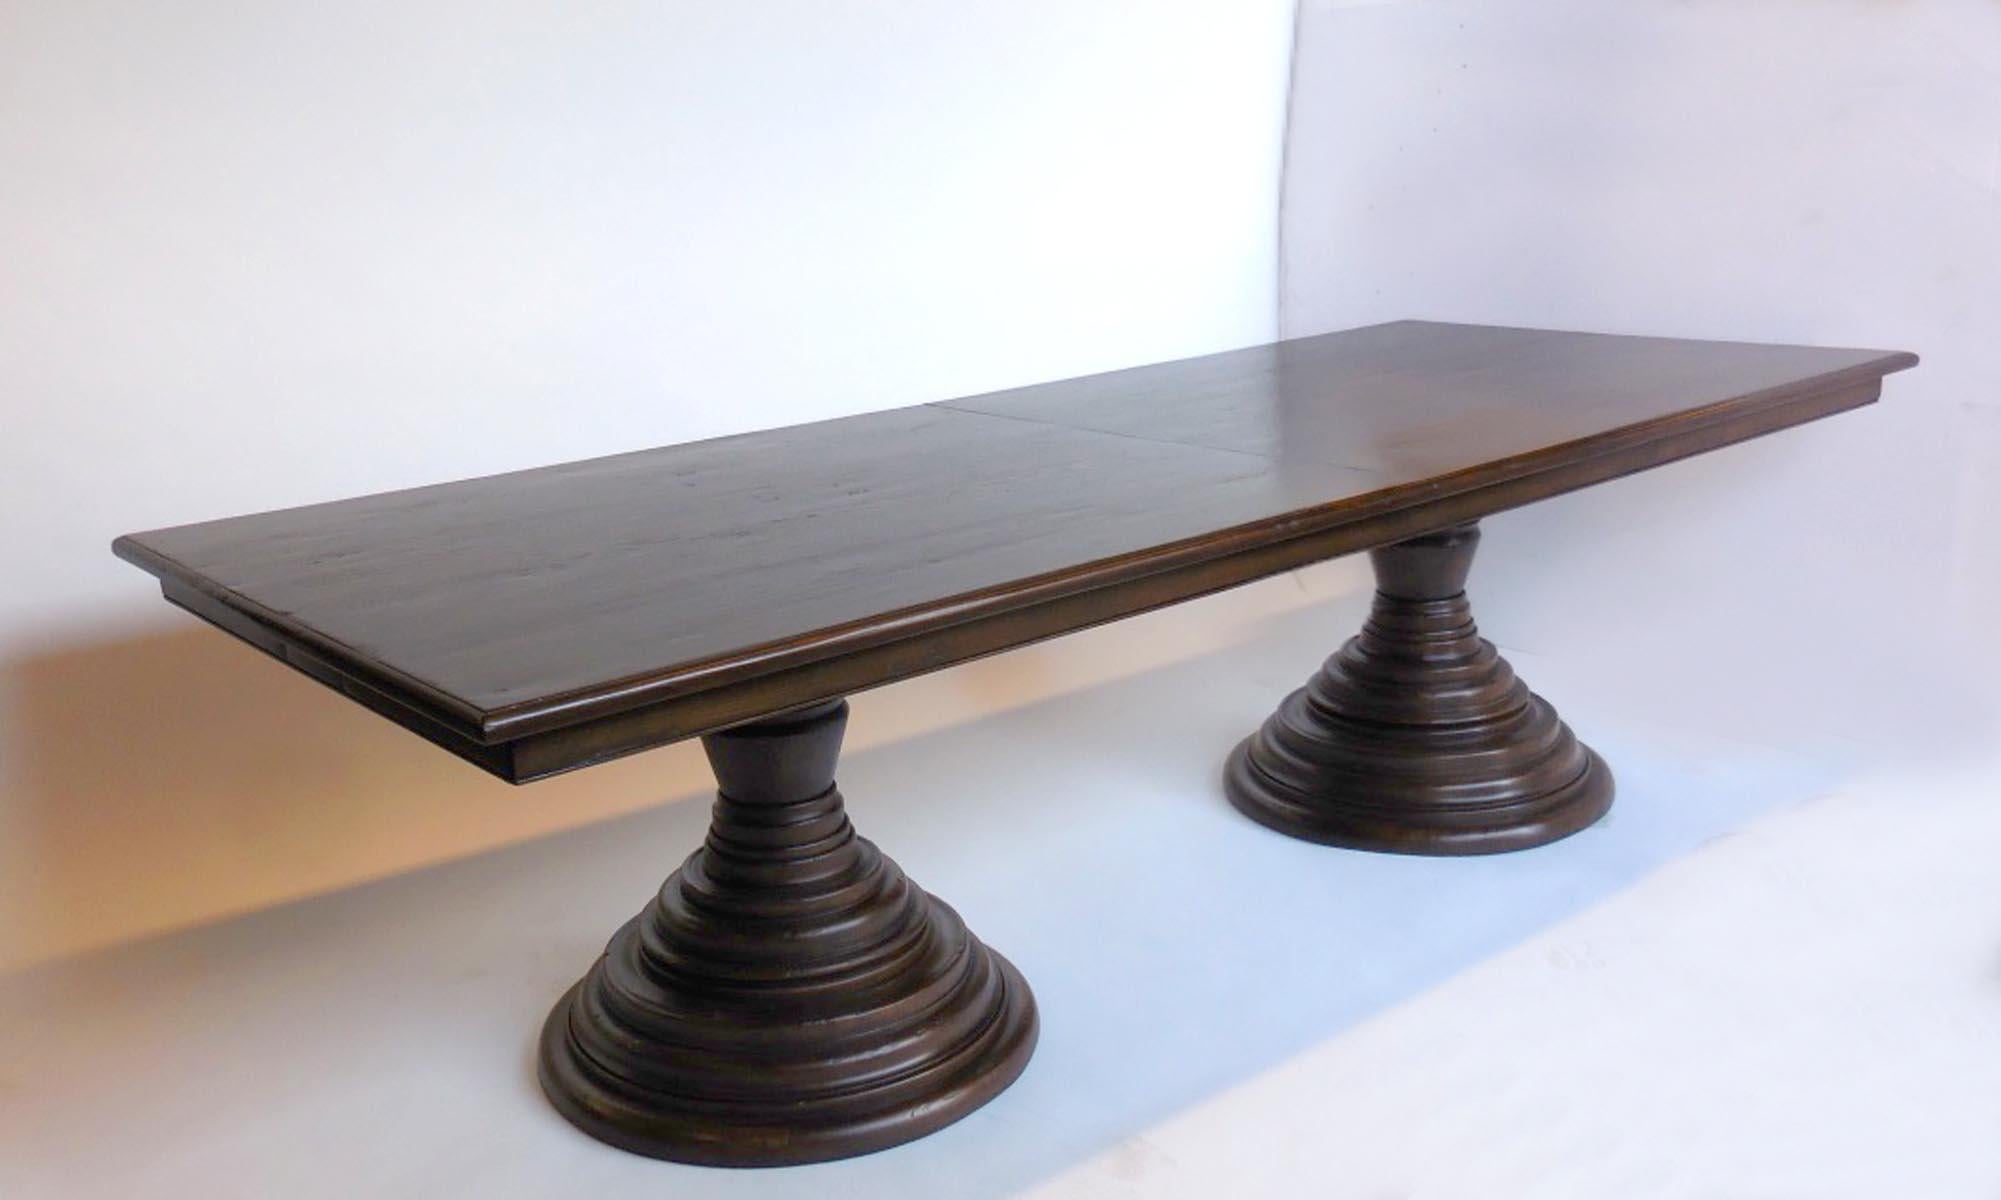 Custom table with double beehive pedestals. This table can be made with or without leaves in any size. As shown in Walnut with a custom finish, medium distress. Price reflects size as shown, 108 inches with two 16 inch leaves, making it 144 inches